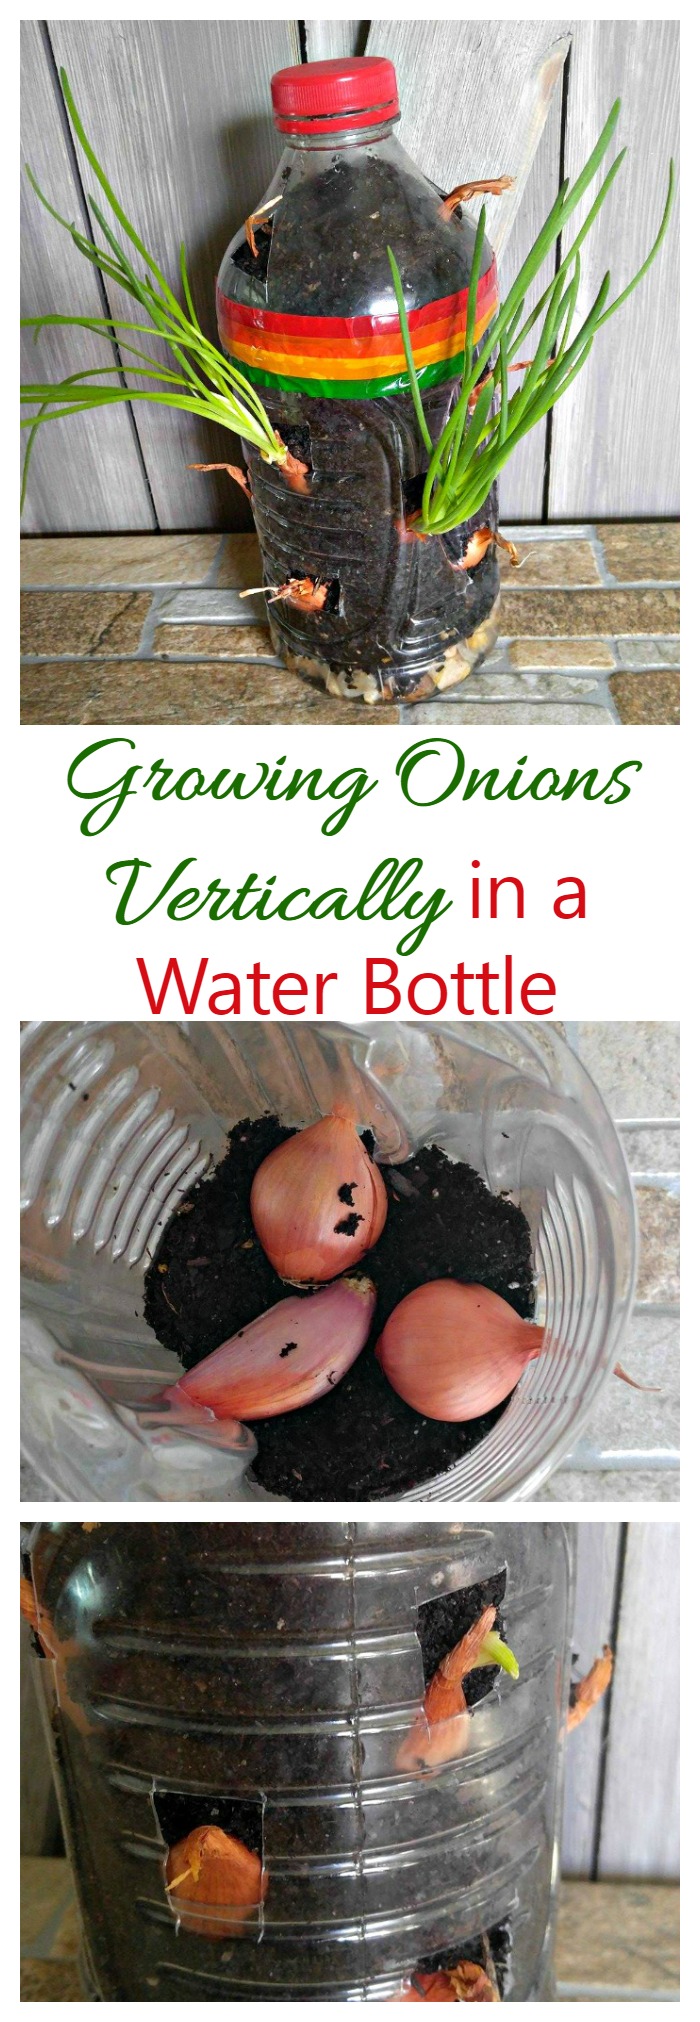 This vertical onion garden in a large water bottle is such a fun project for kids to take part in. They will love watching the onions sprout out of the holes in the bottle.